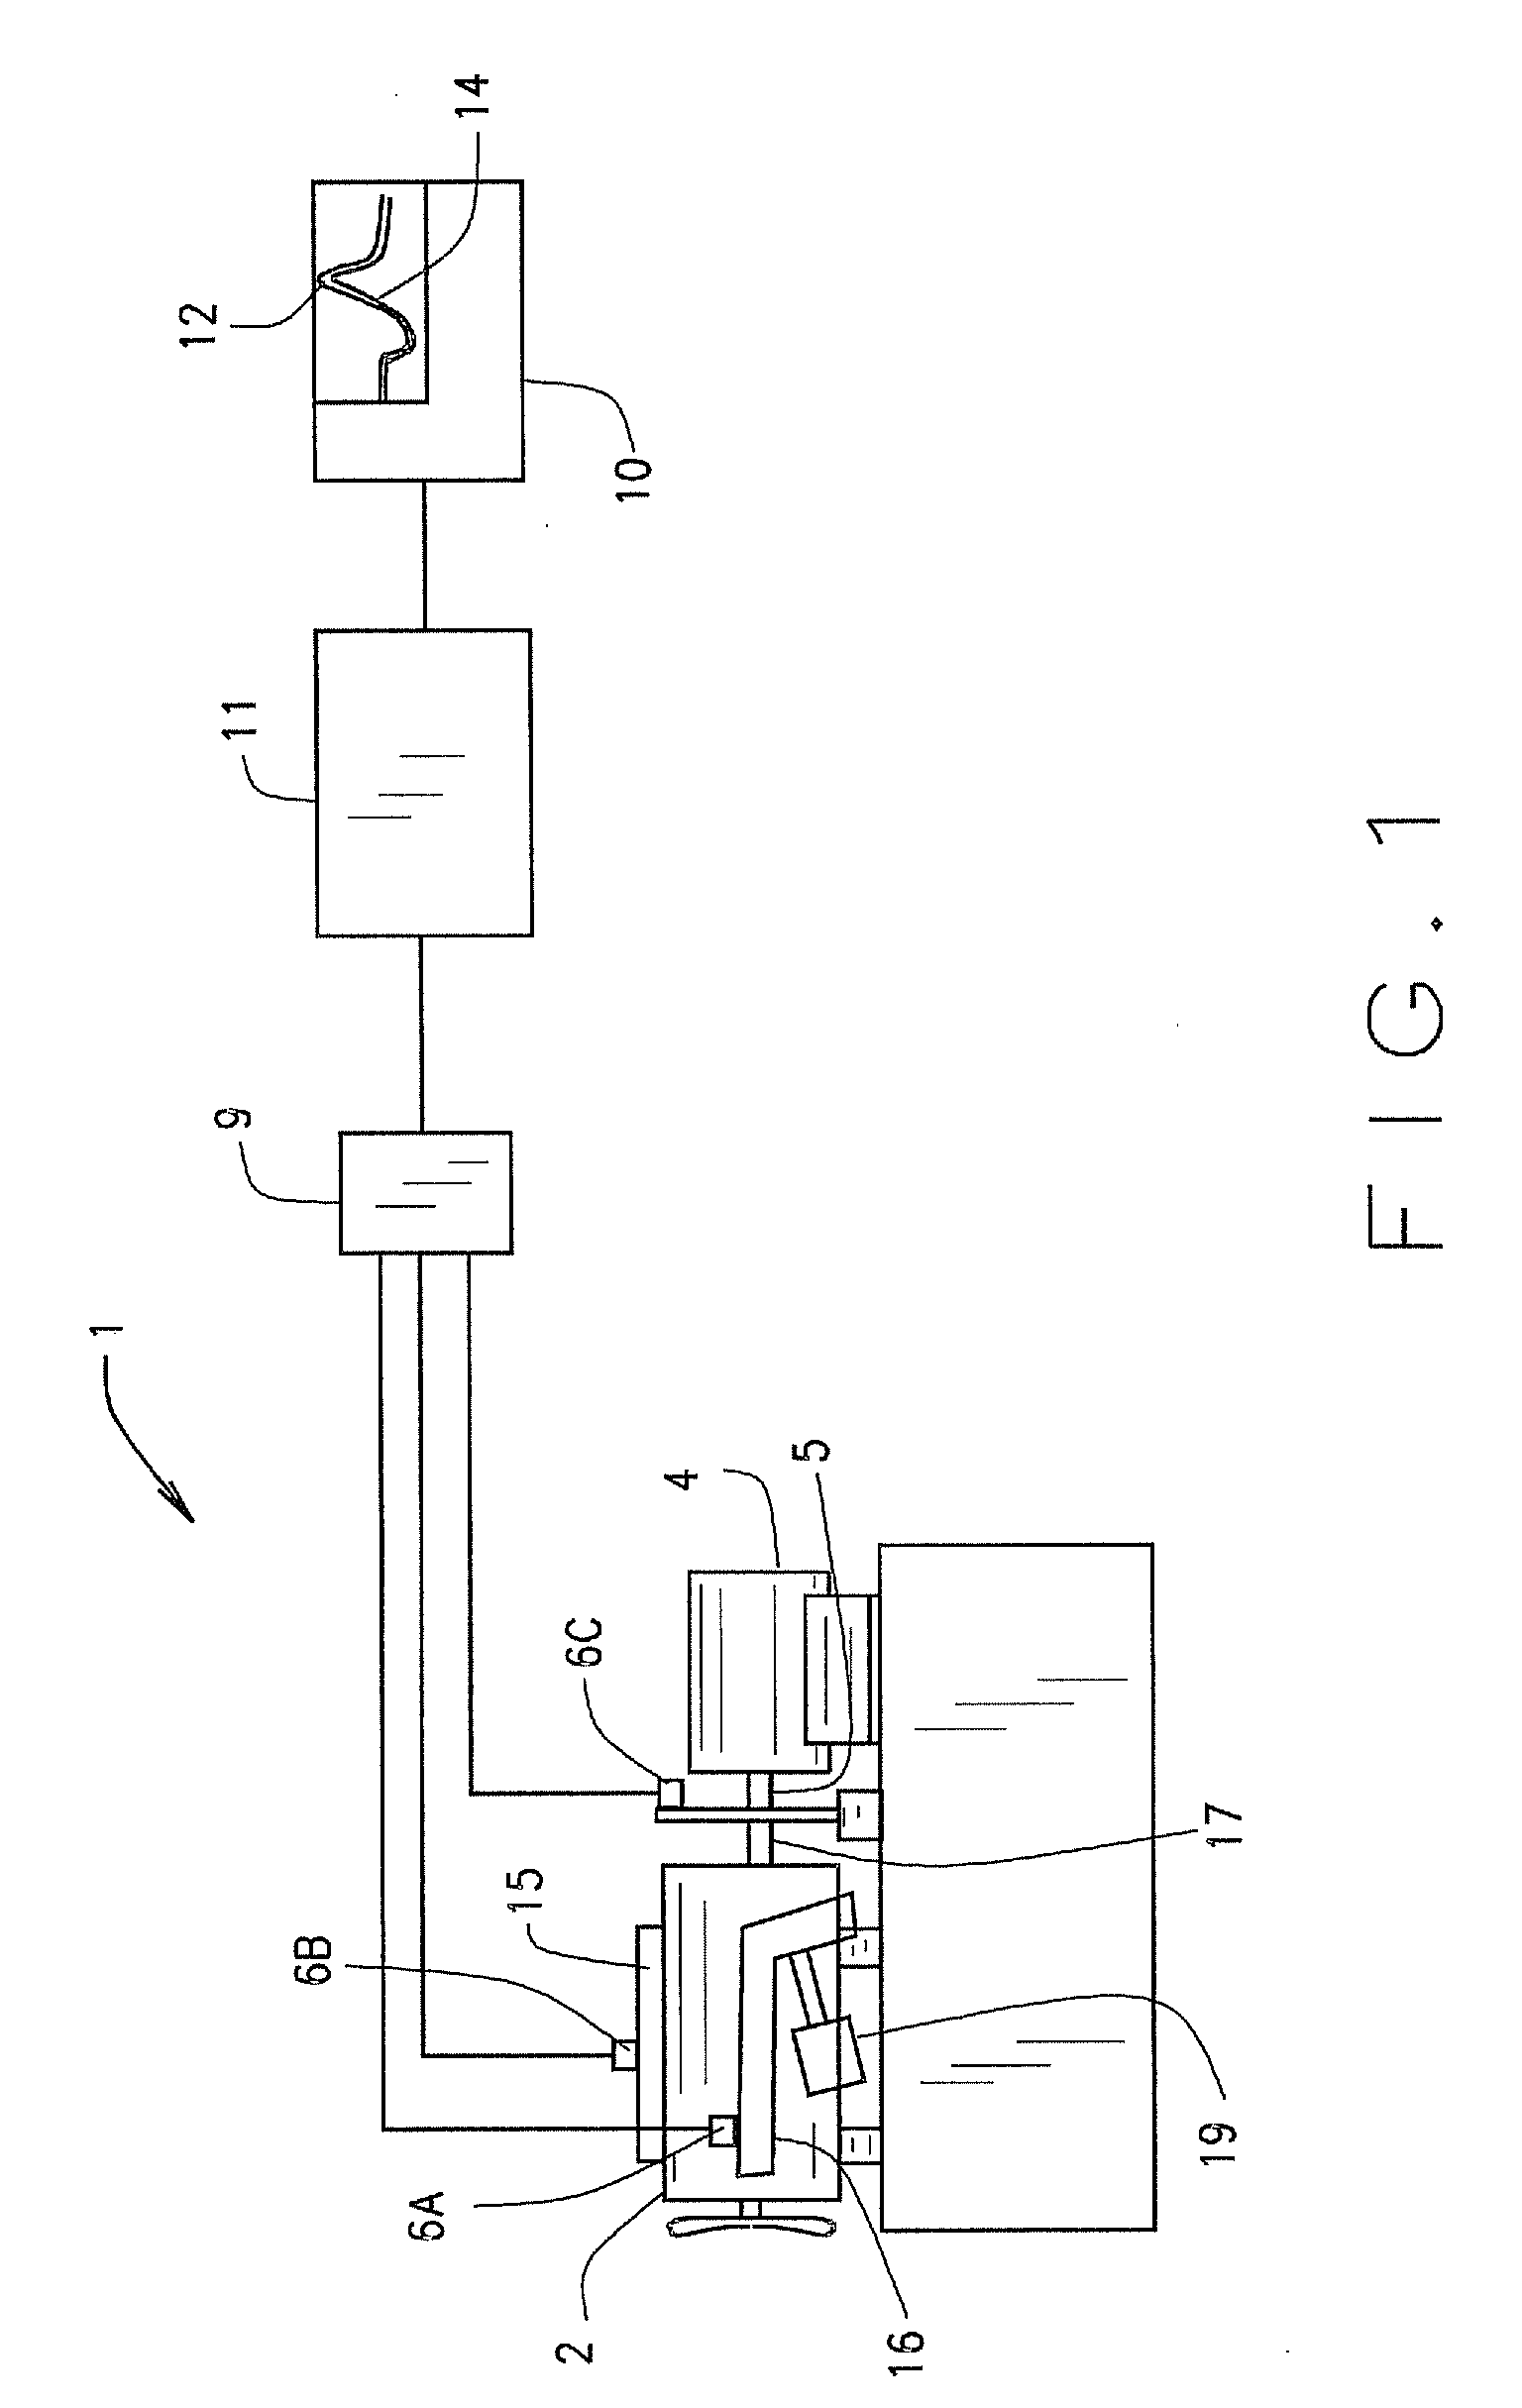 Method and apparatus for testing automotive components